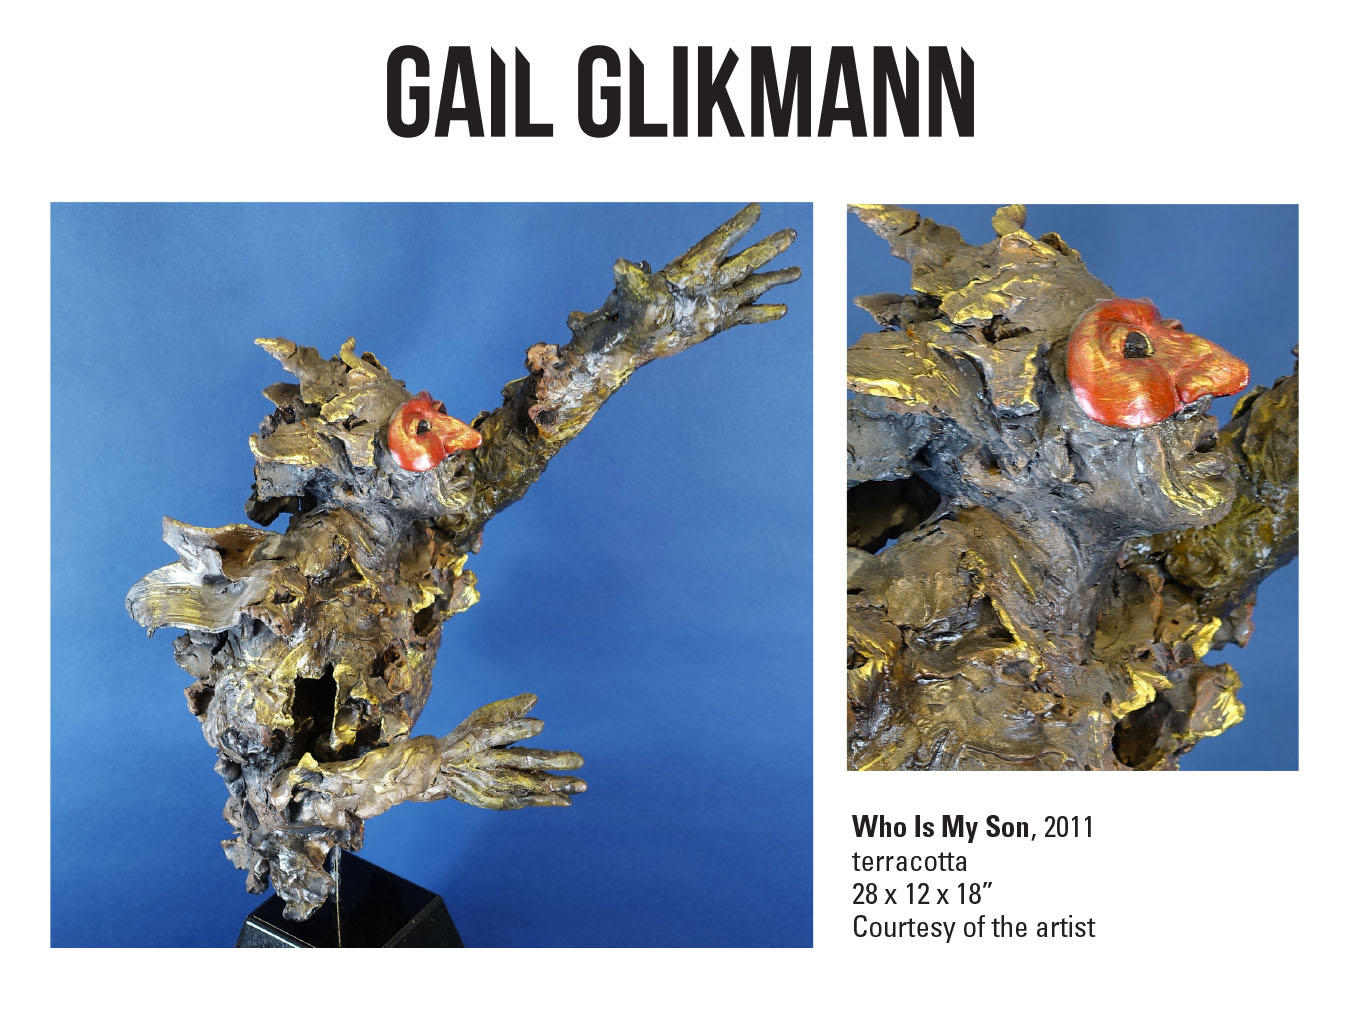 Gail Glikmann, Who Is My Son, 2011. Terracotta. 28 x 12 x 18” Courtesy of the artist. A sculpture of a man reaching upwards with a red mask on.